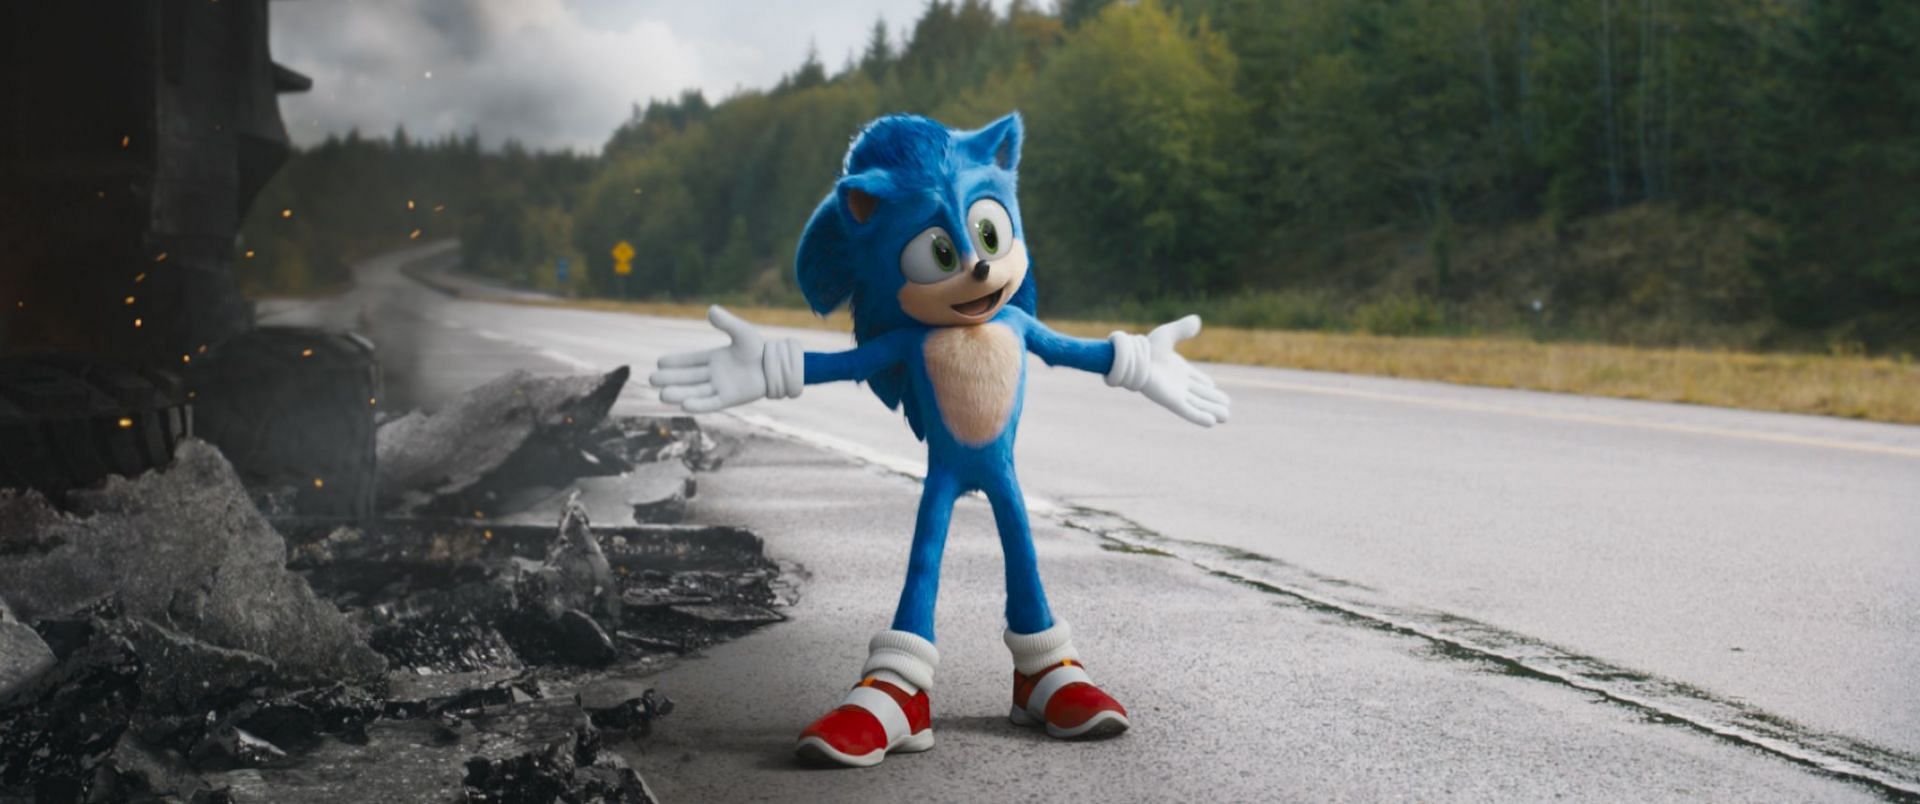 Sonic the Hedgehog 2 (2022) - Yule Log - Paramount Pictures 